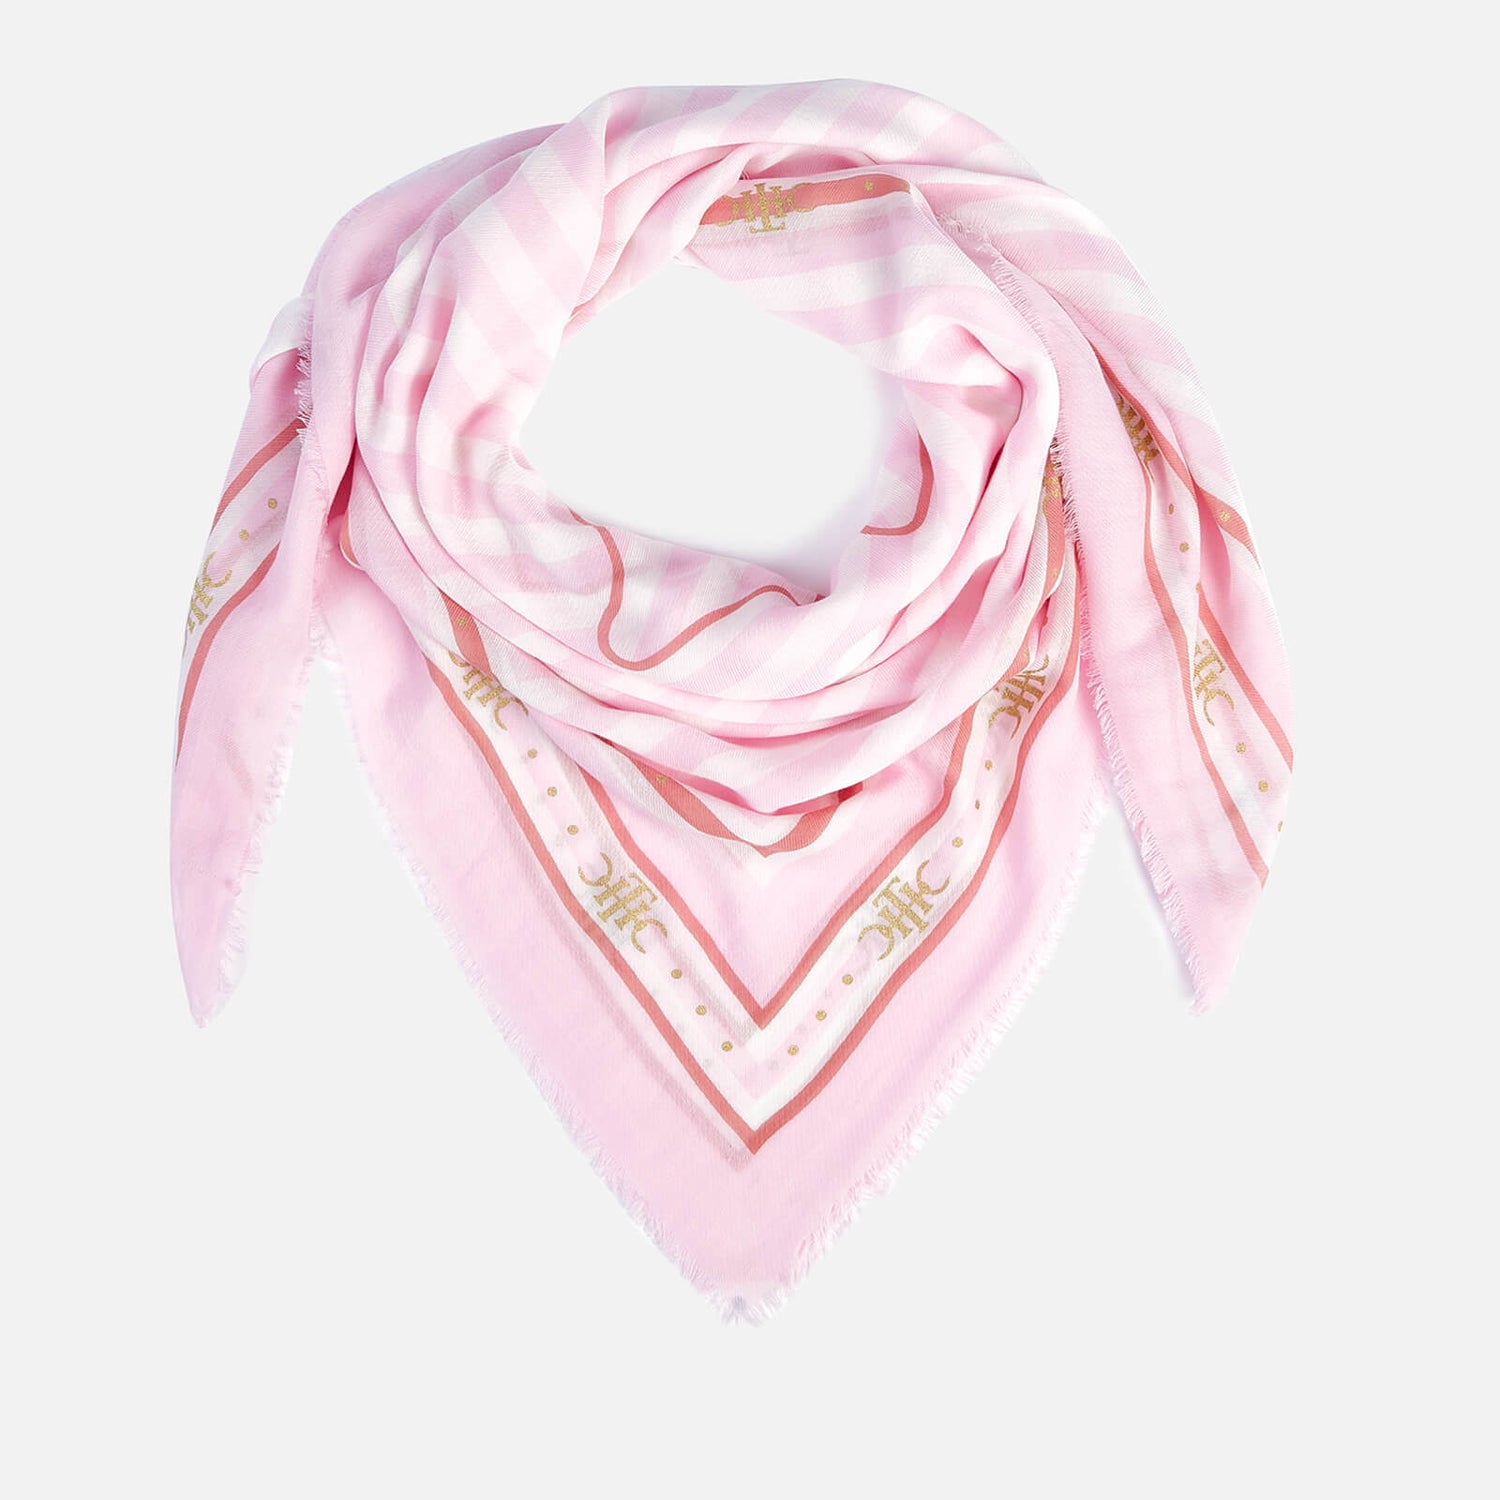 Tommy Hilfiger Women's TH Stripe Square Scarf - Light Pink